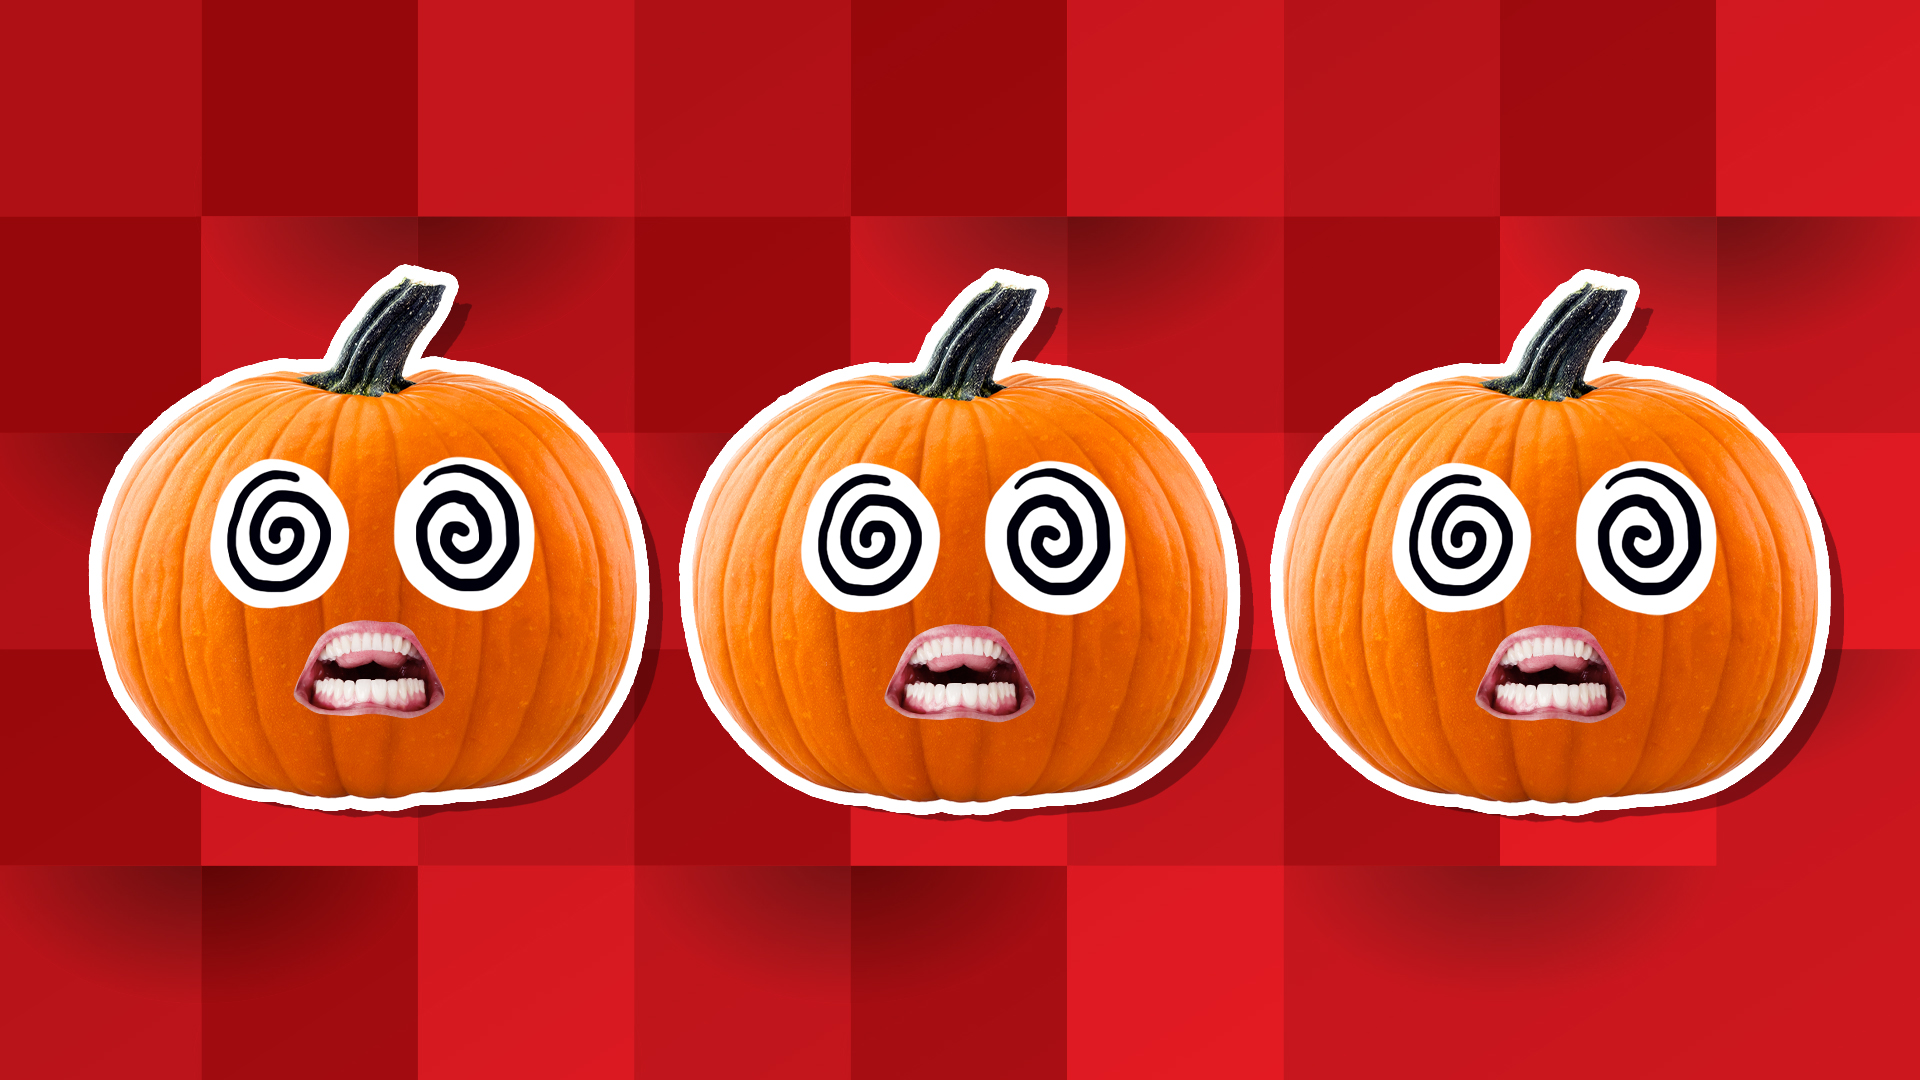 3 open mouthed Pumpkins